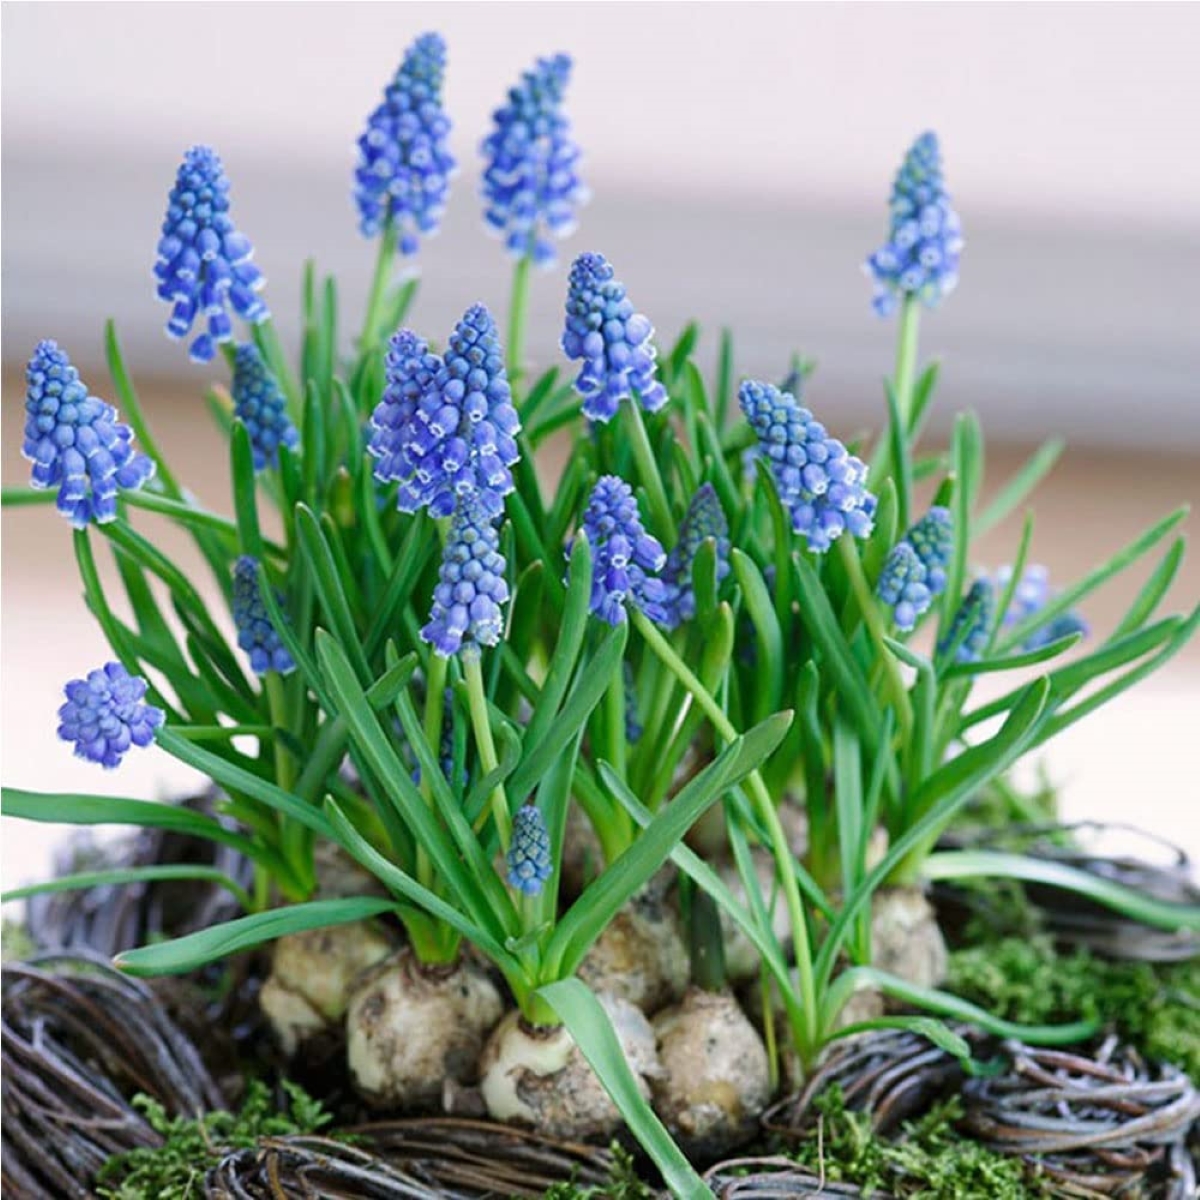 flowers that attract bees - flower bulbs with blue blooms